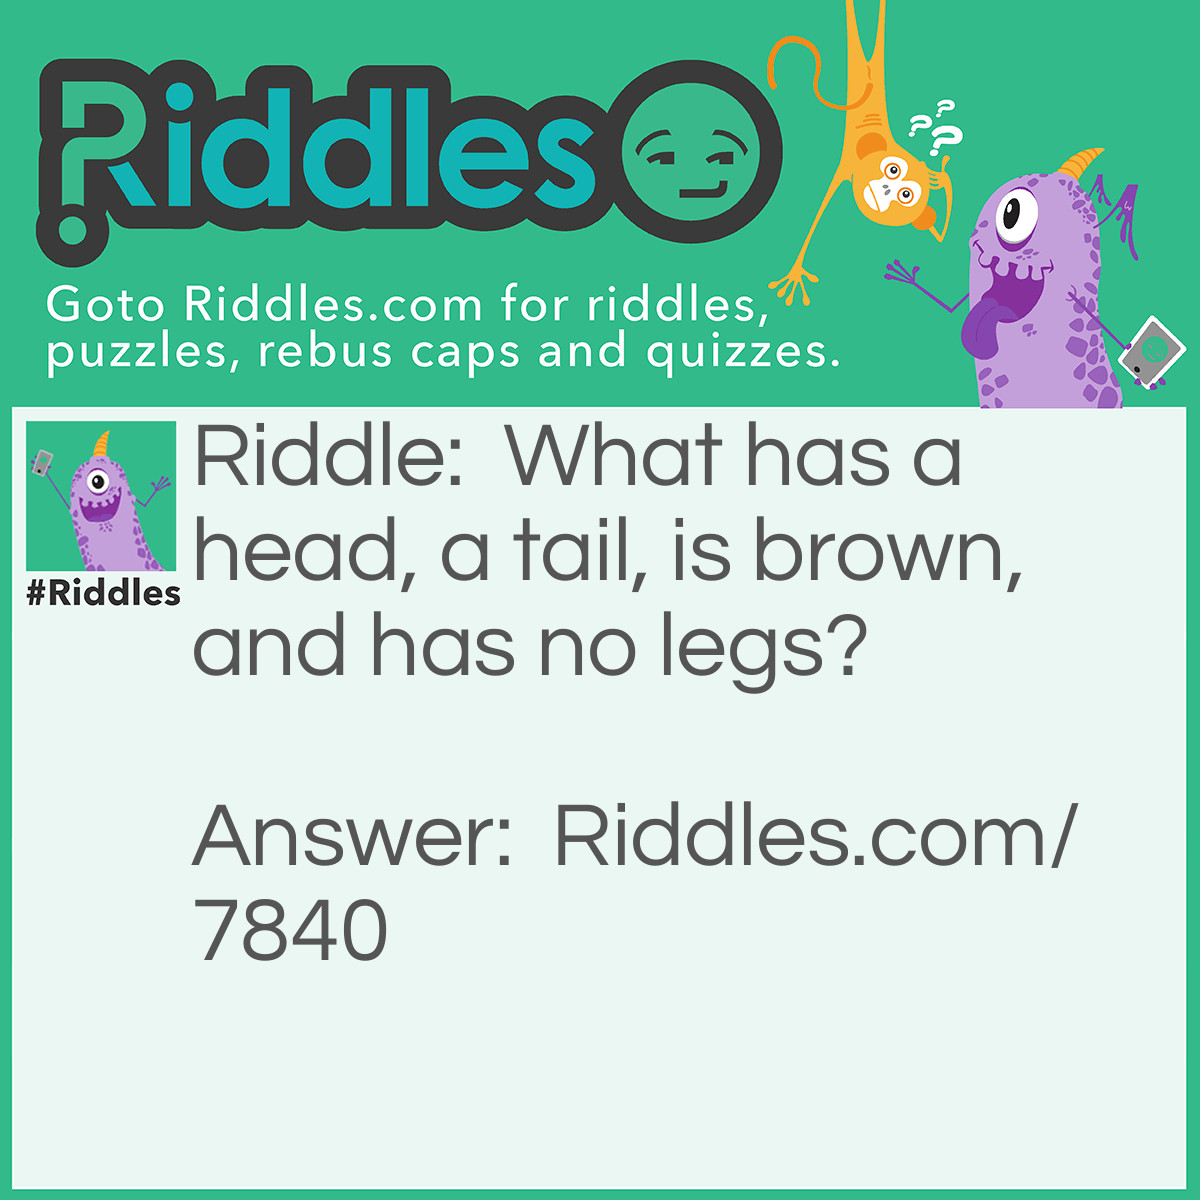 Riddle: What has a head, and a tail, is brown, and has no legs? Answer: A penny.